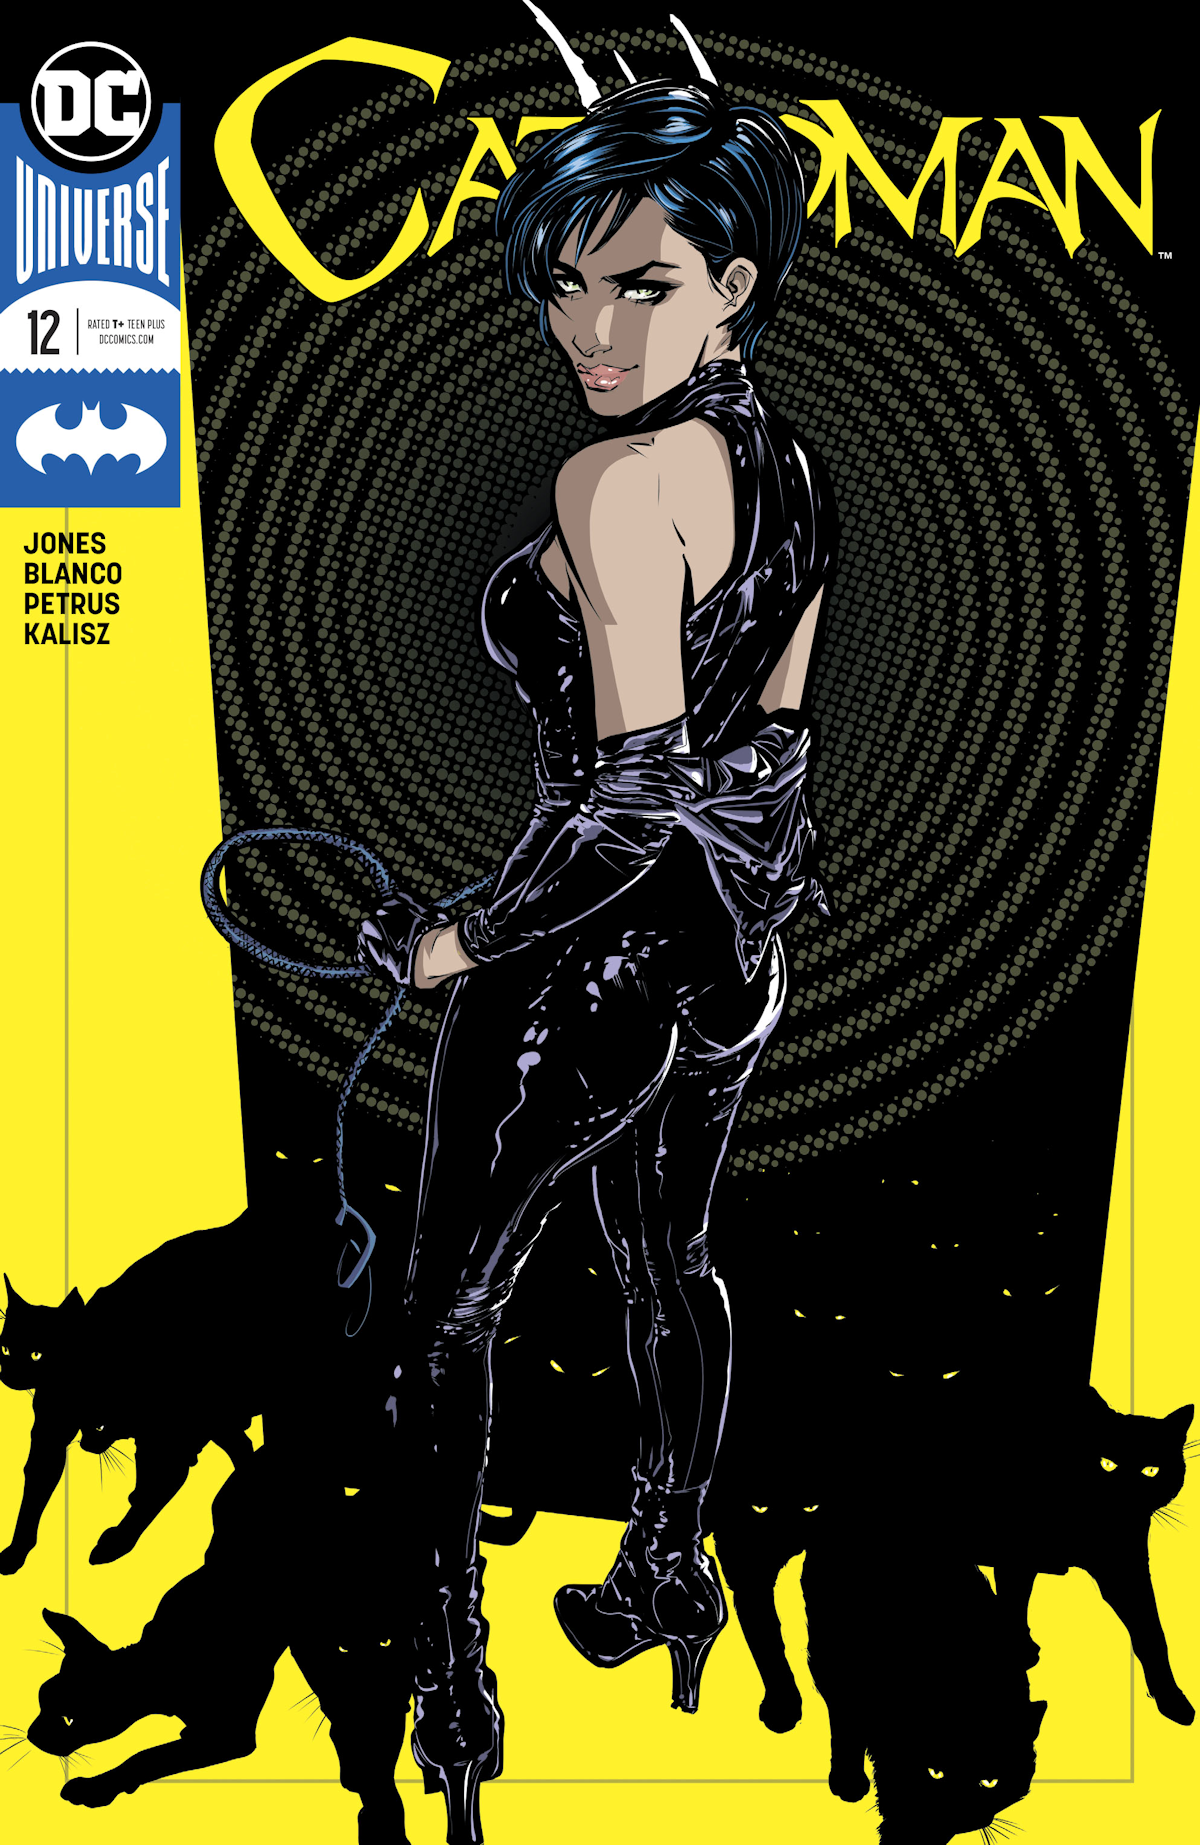 Catwoman Vol. 5 12 (Cover A)